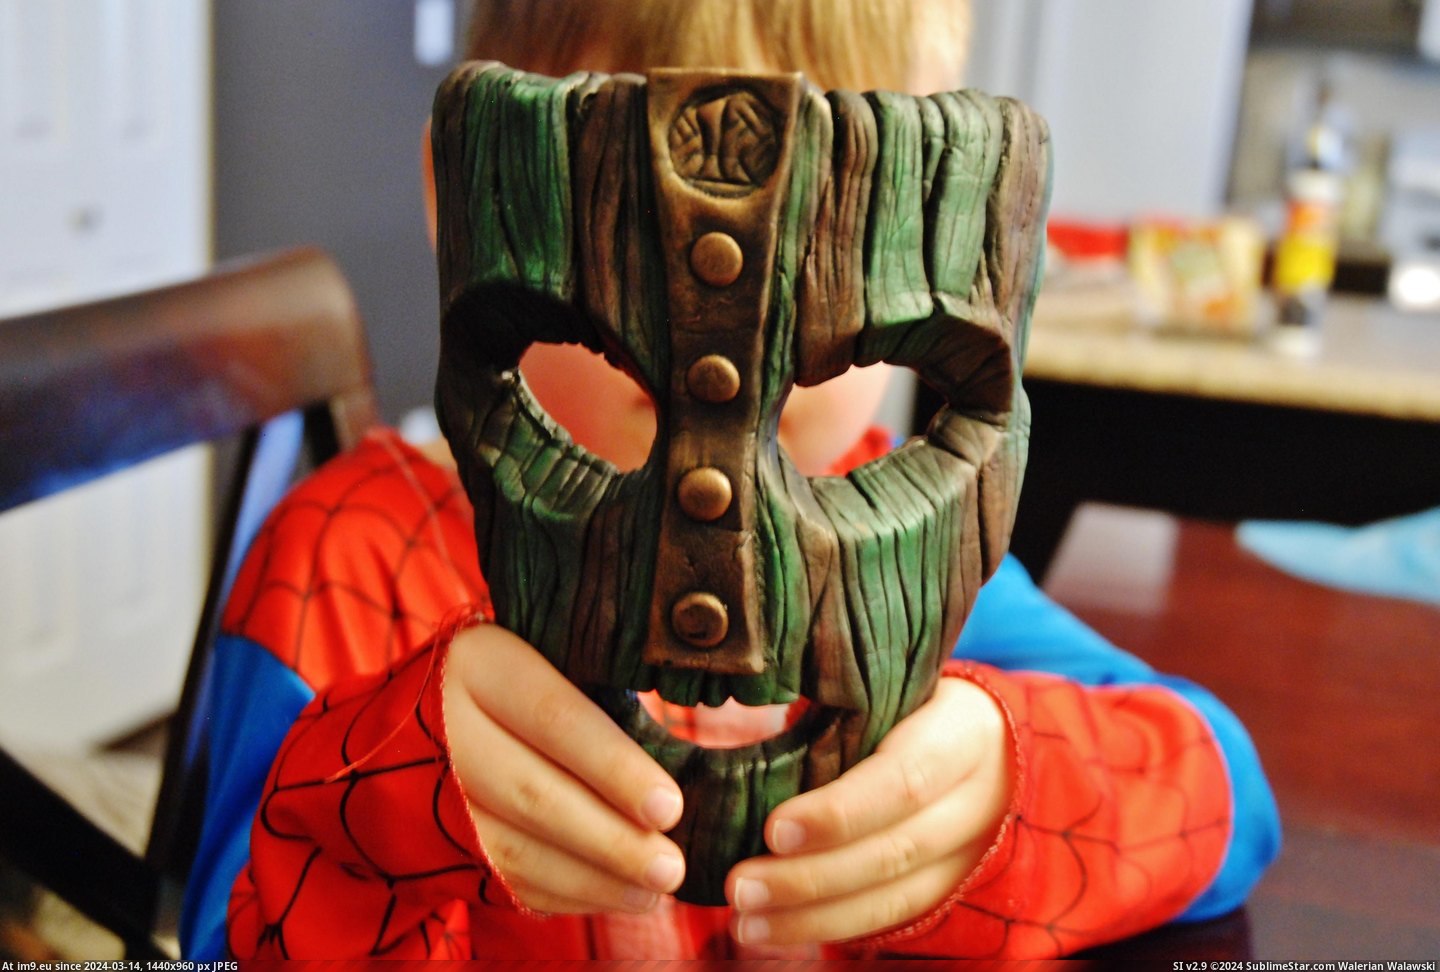 #Wanted #Son #Stores #Superheroes #Manag #Movie #Mask [Pics] My son wanted the mask from the movie the Mask, but it's all superheroes in stores these days so I made it for him. Manag Pic. (Image of album My r/PICS favs))